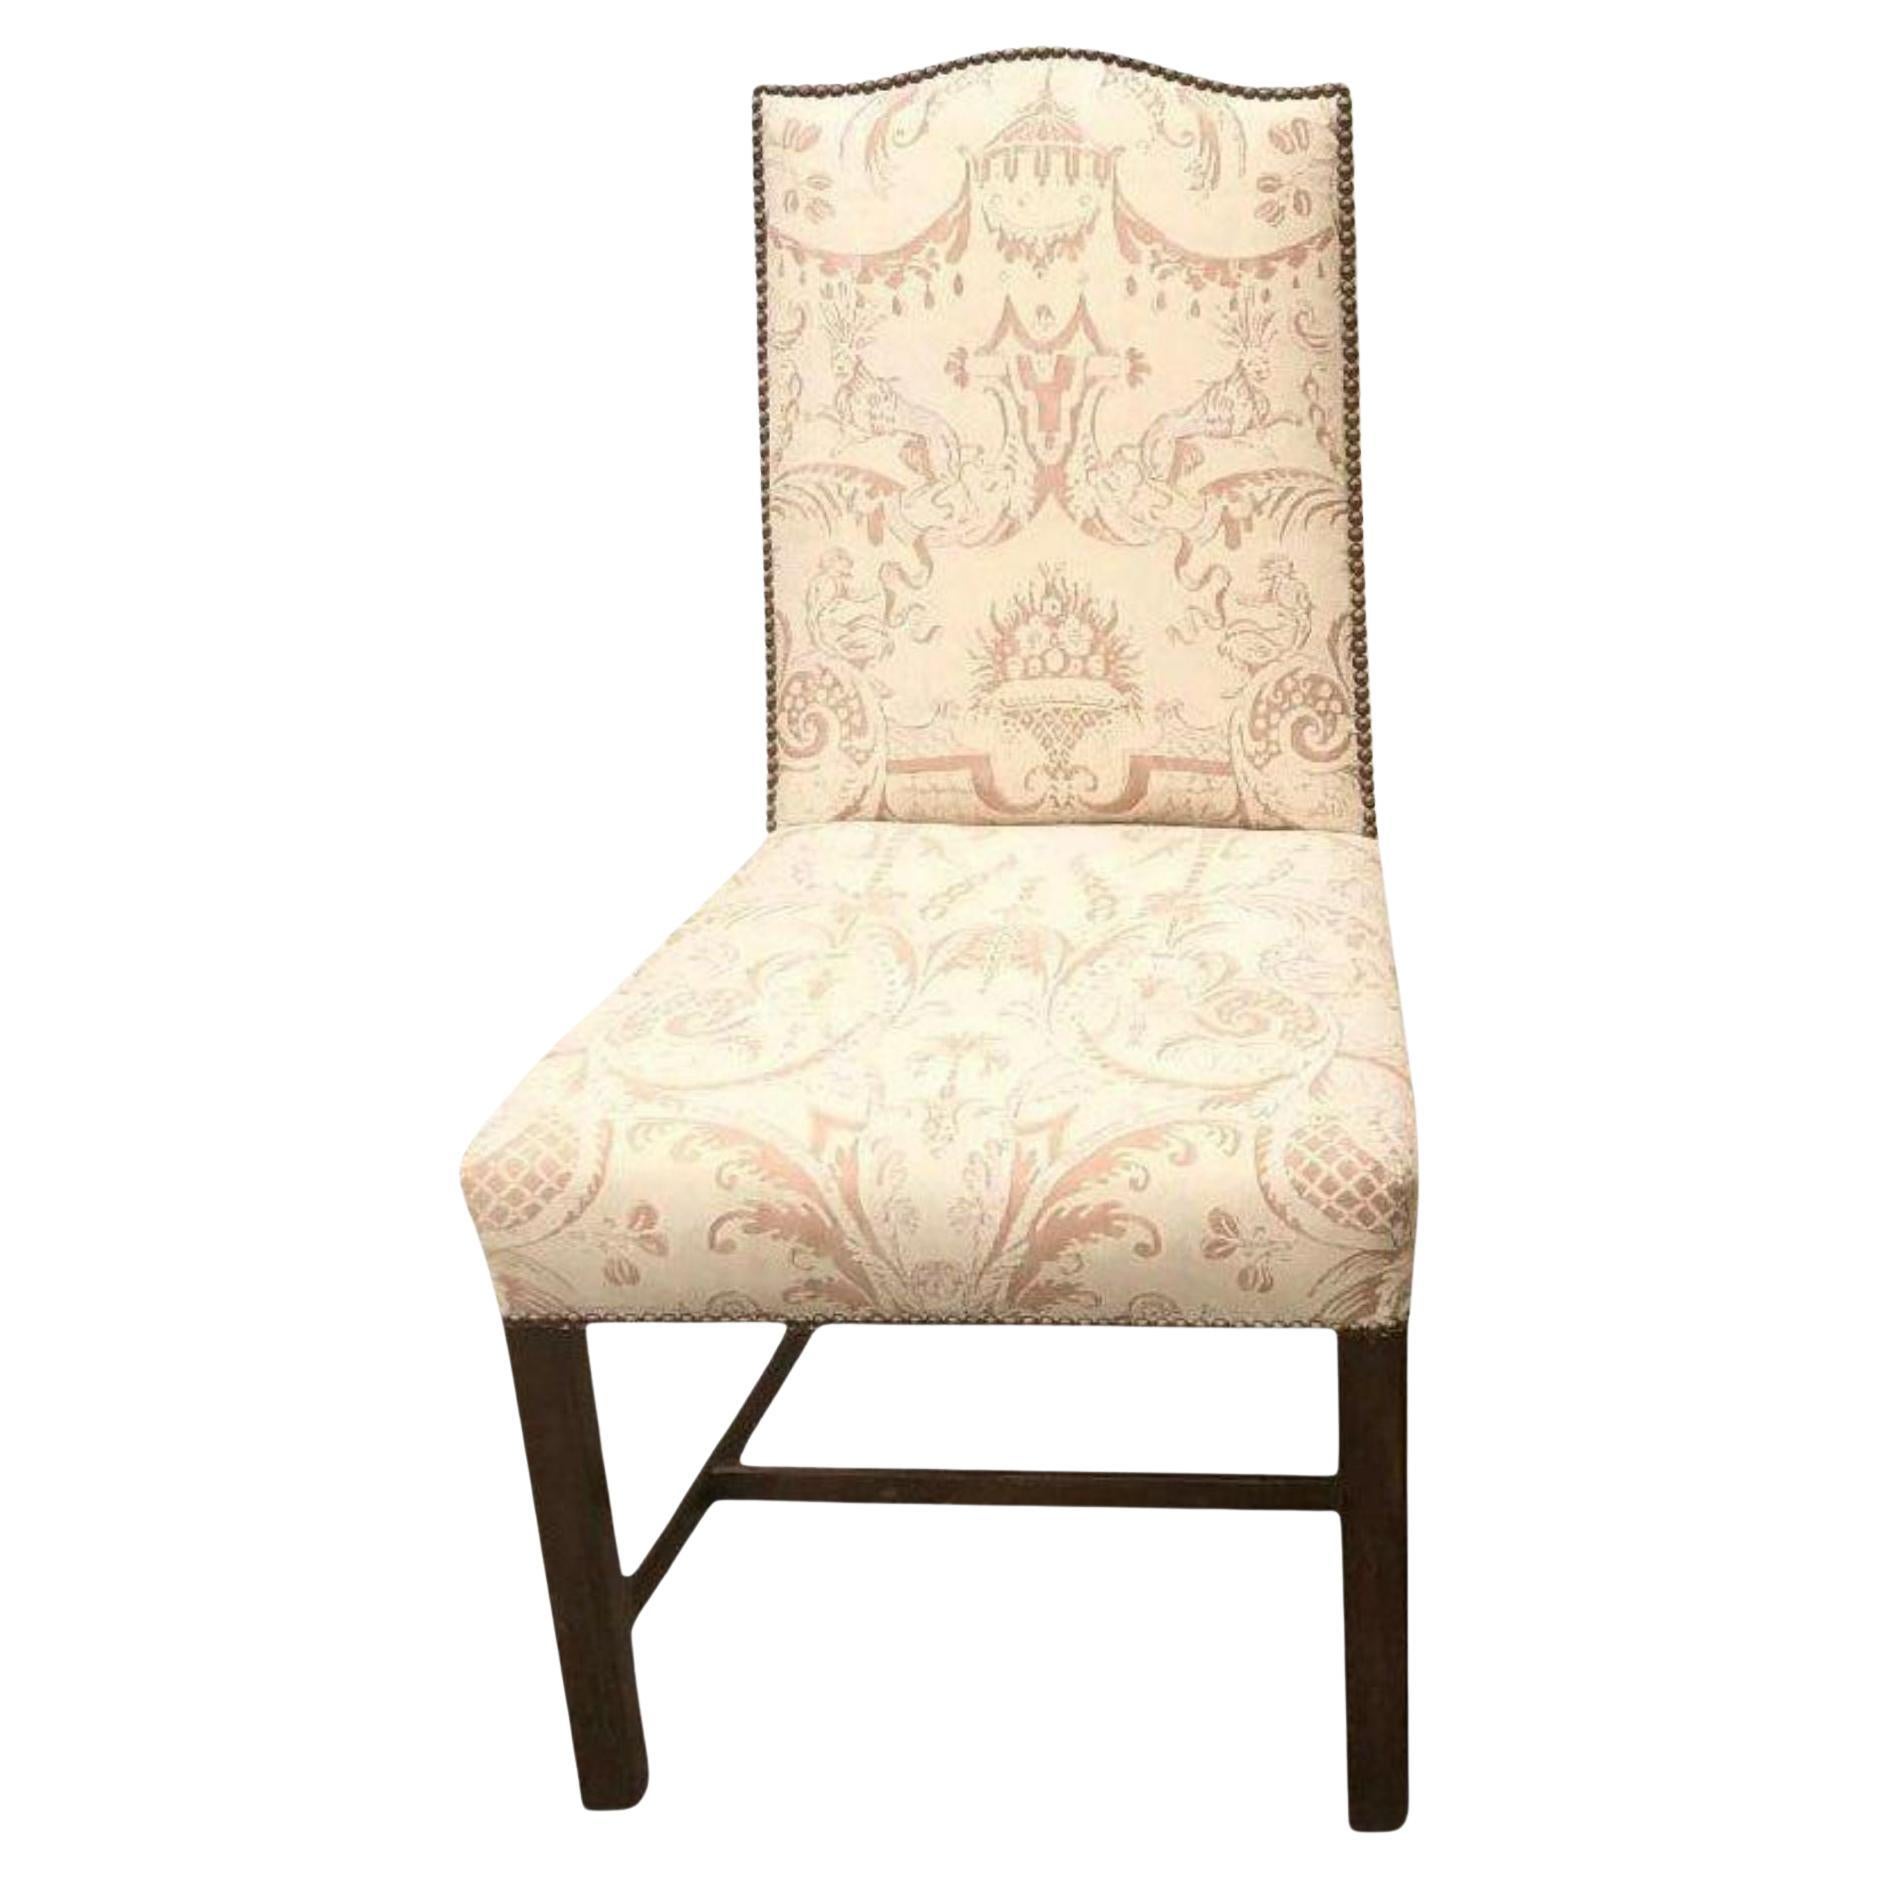 Fortuny Upholstered Antique Chinese Chippendale Designer Chair